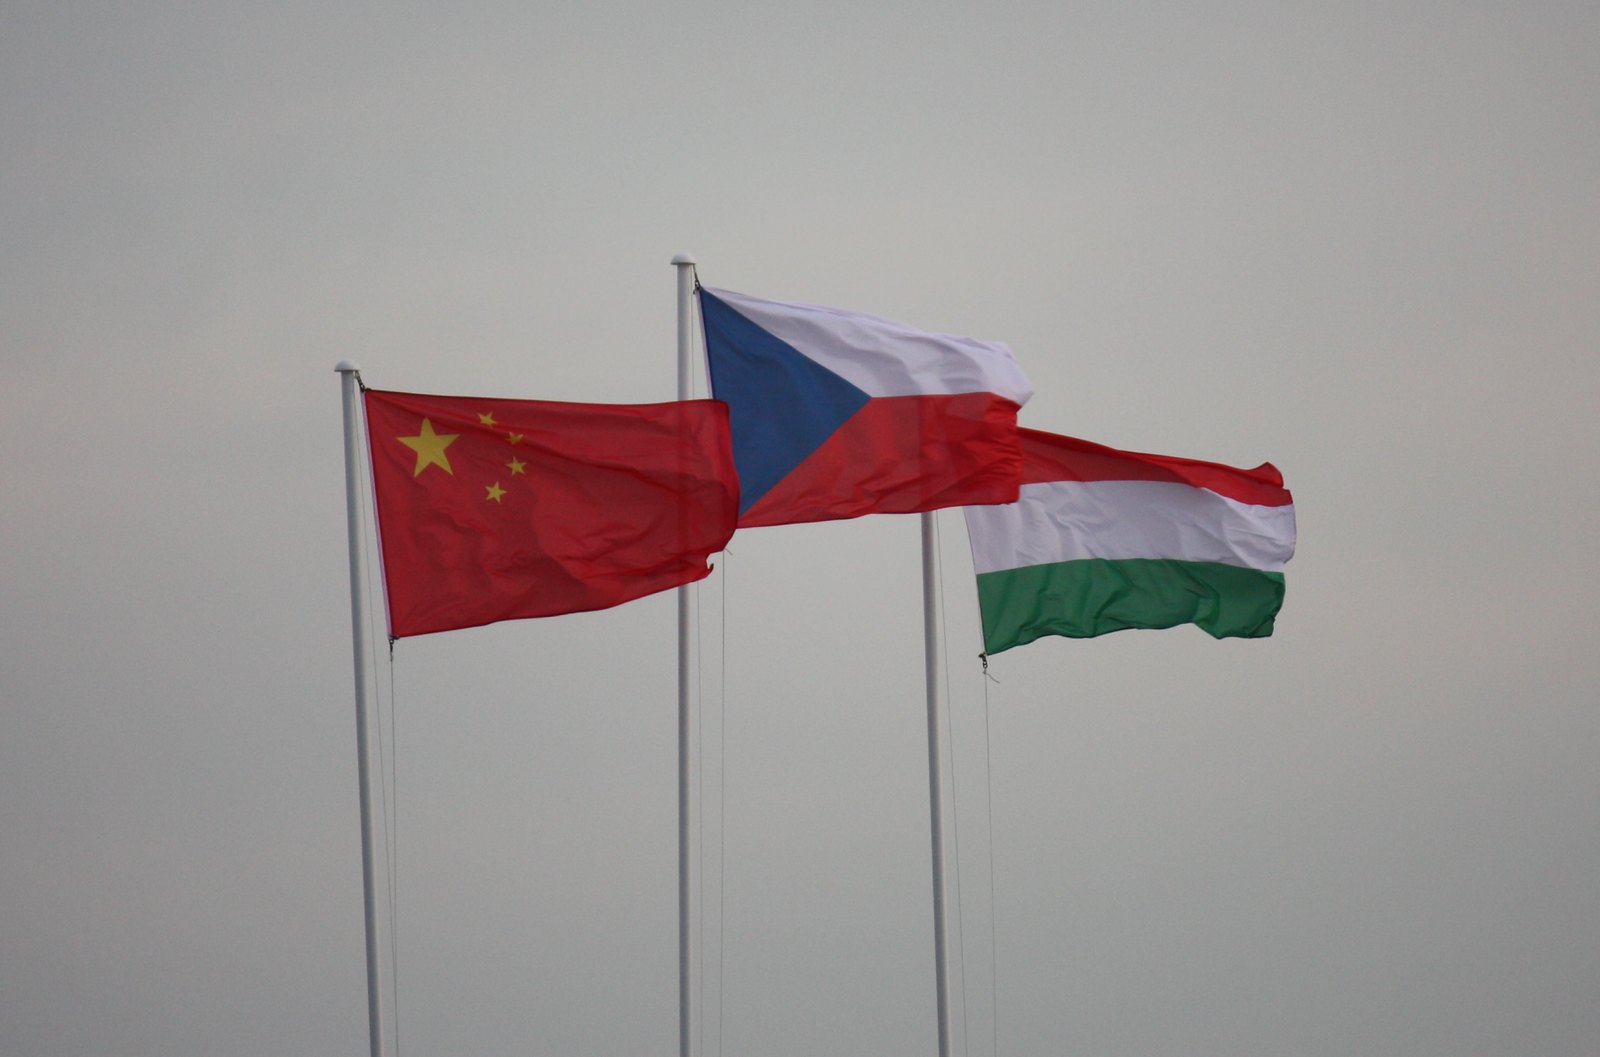 The echoes of PRC voices in Czech experts’ language